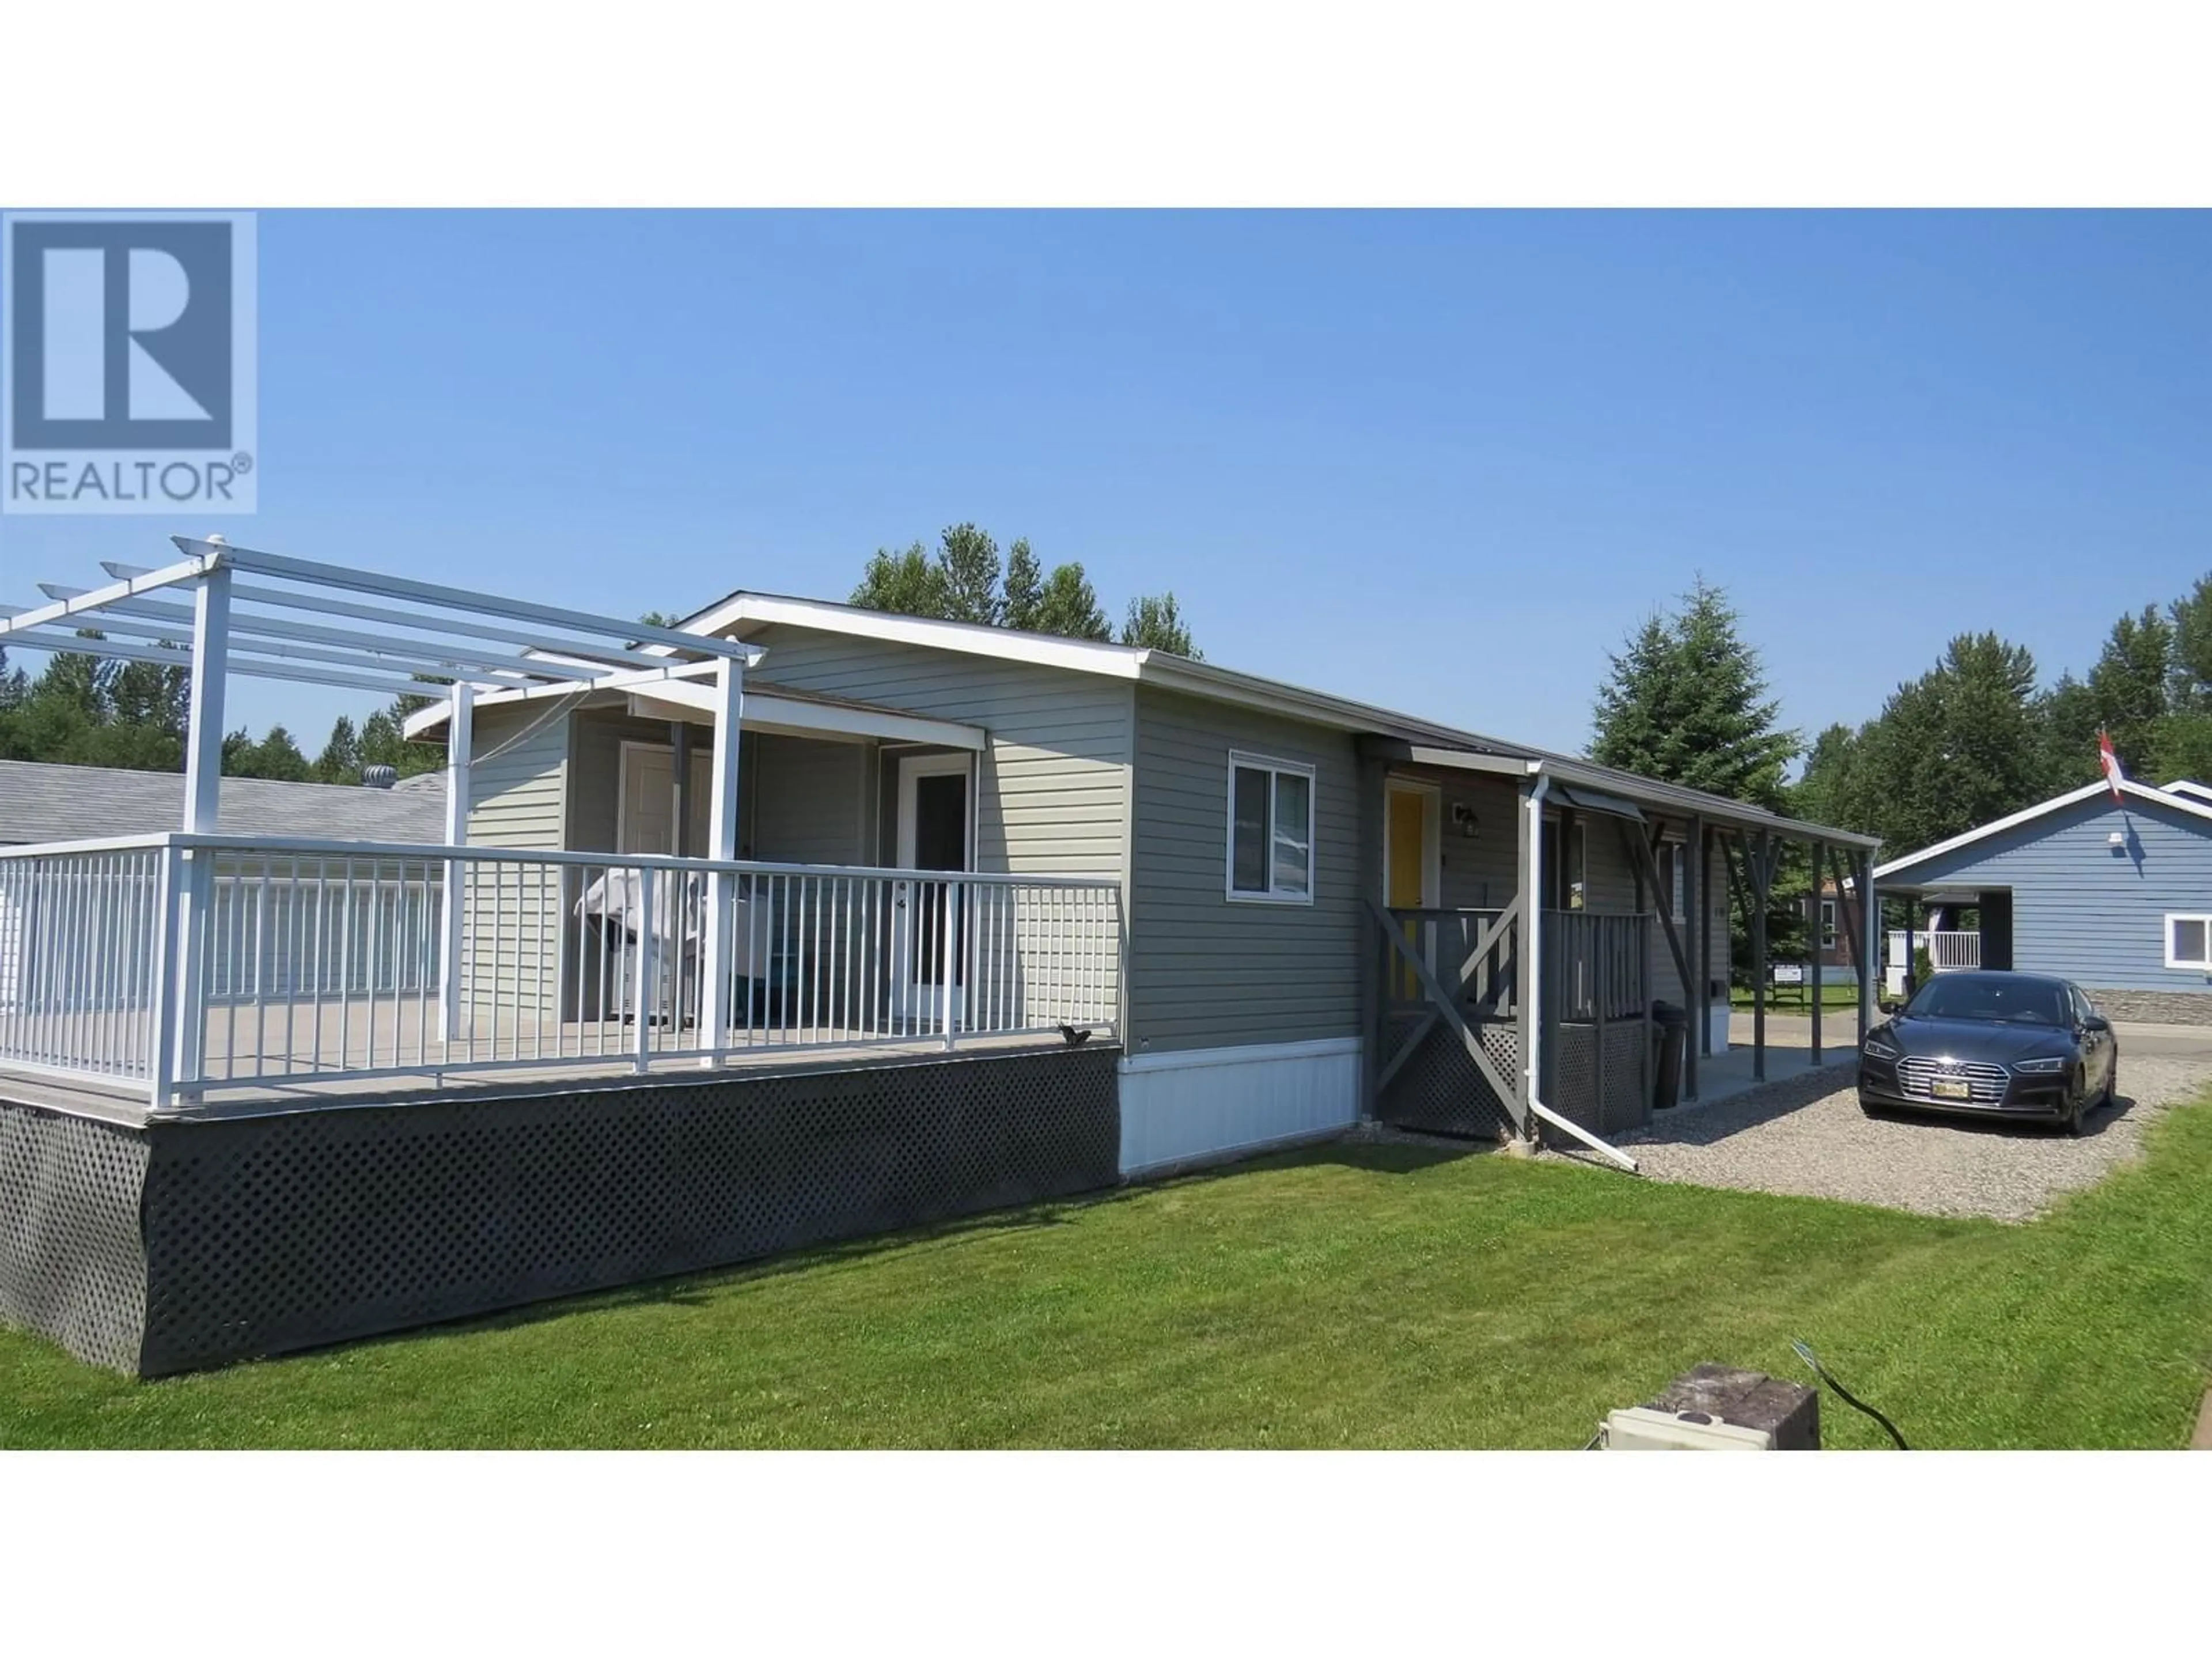 A pic from exterior of the house or condo for 2180 GOLDEN POND ROAD, Quesnel British Columbia V2J7A2